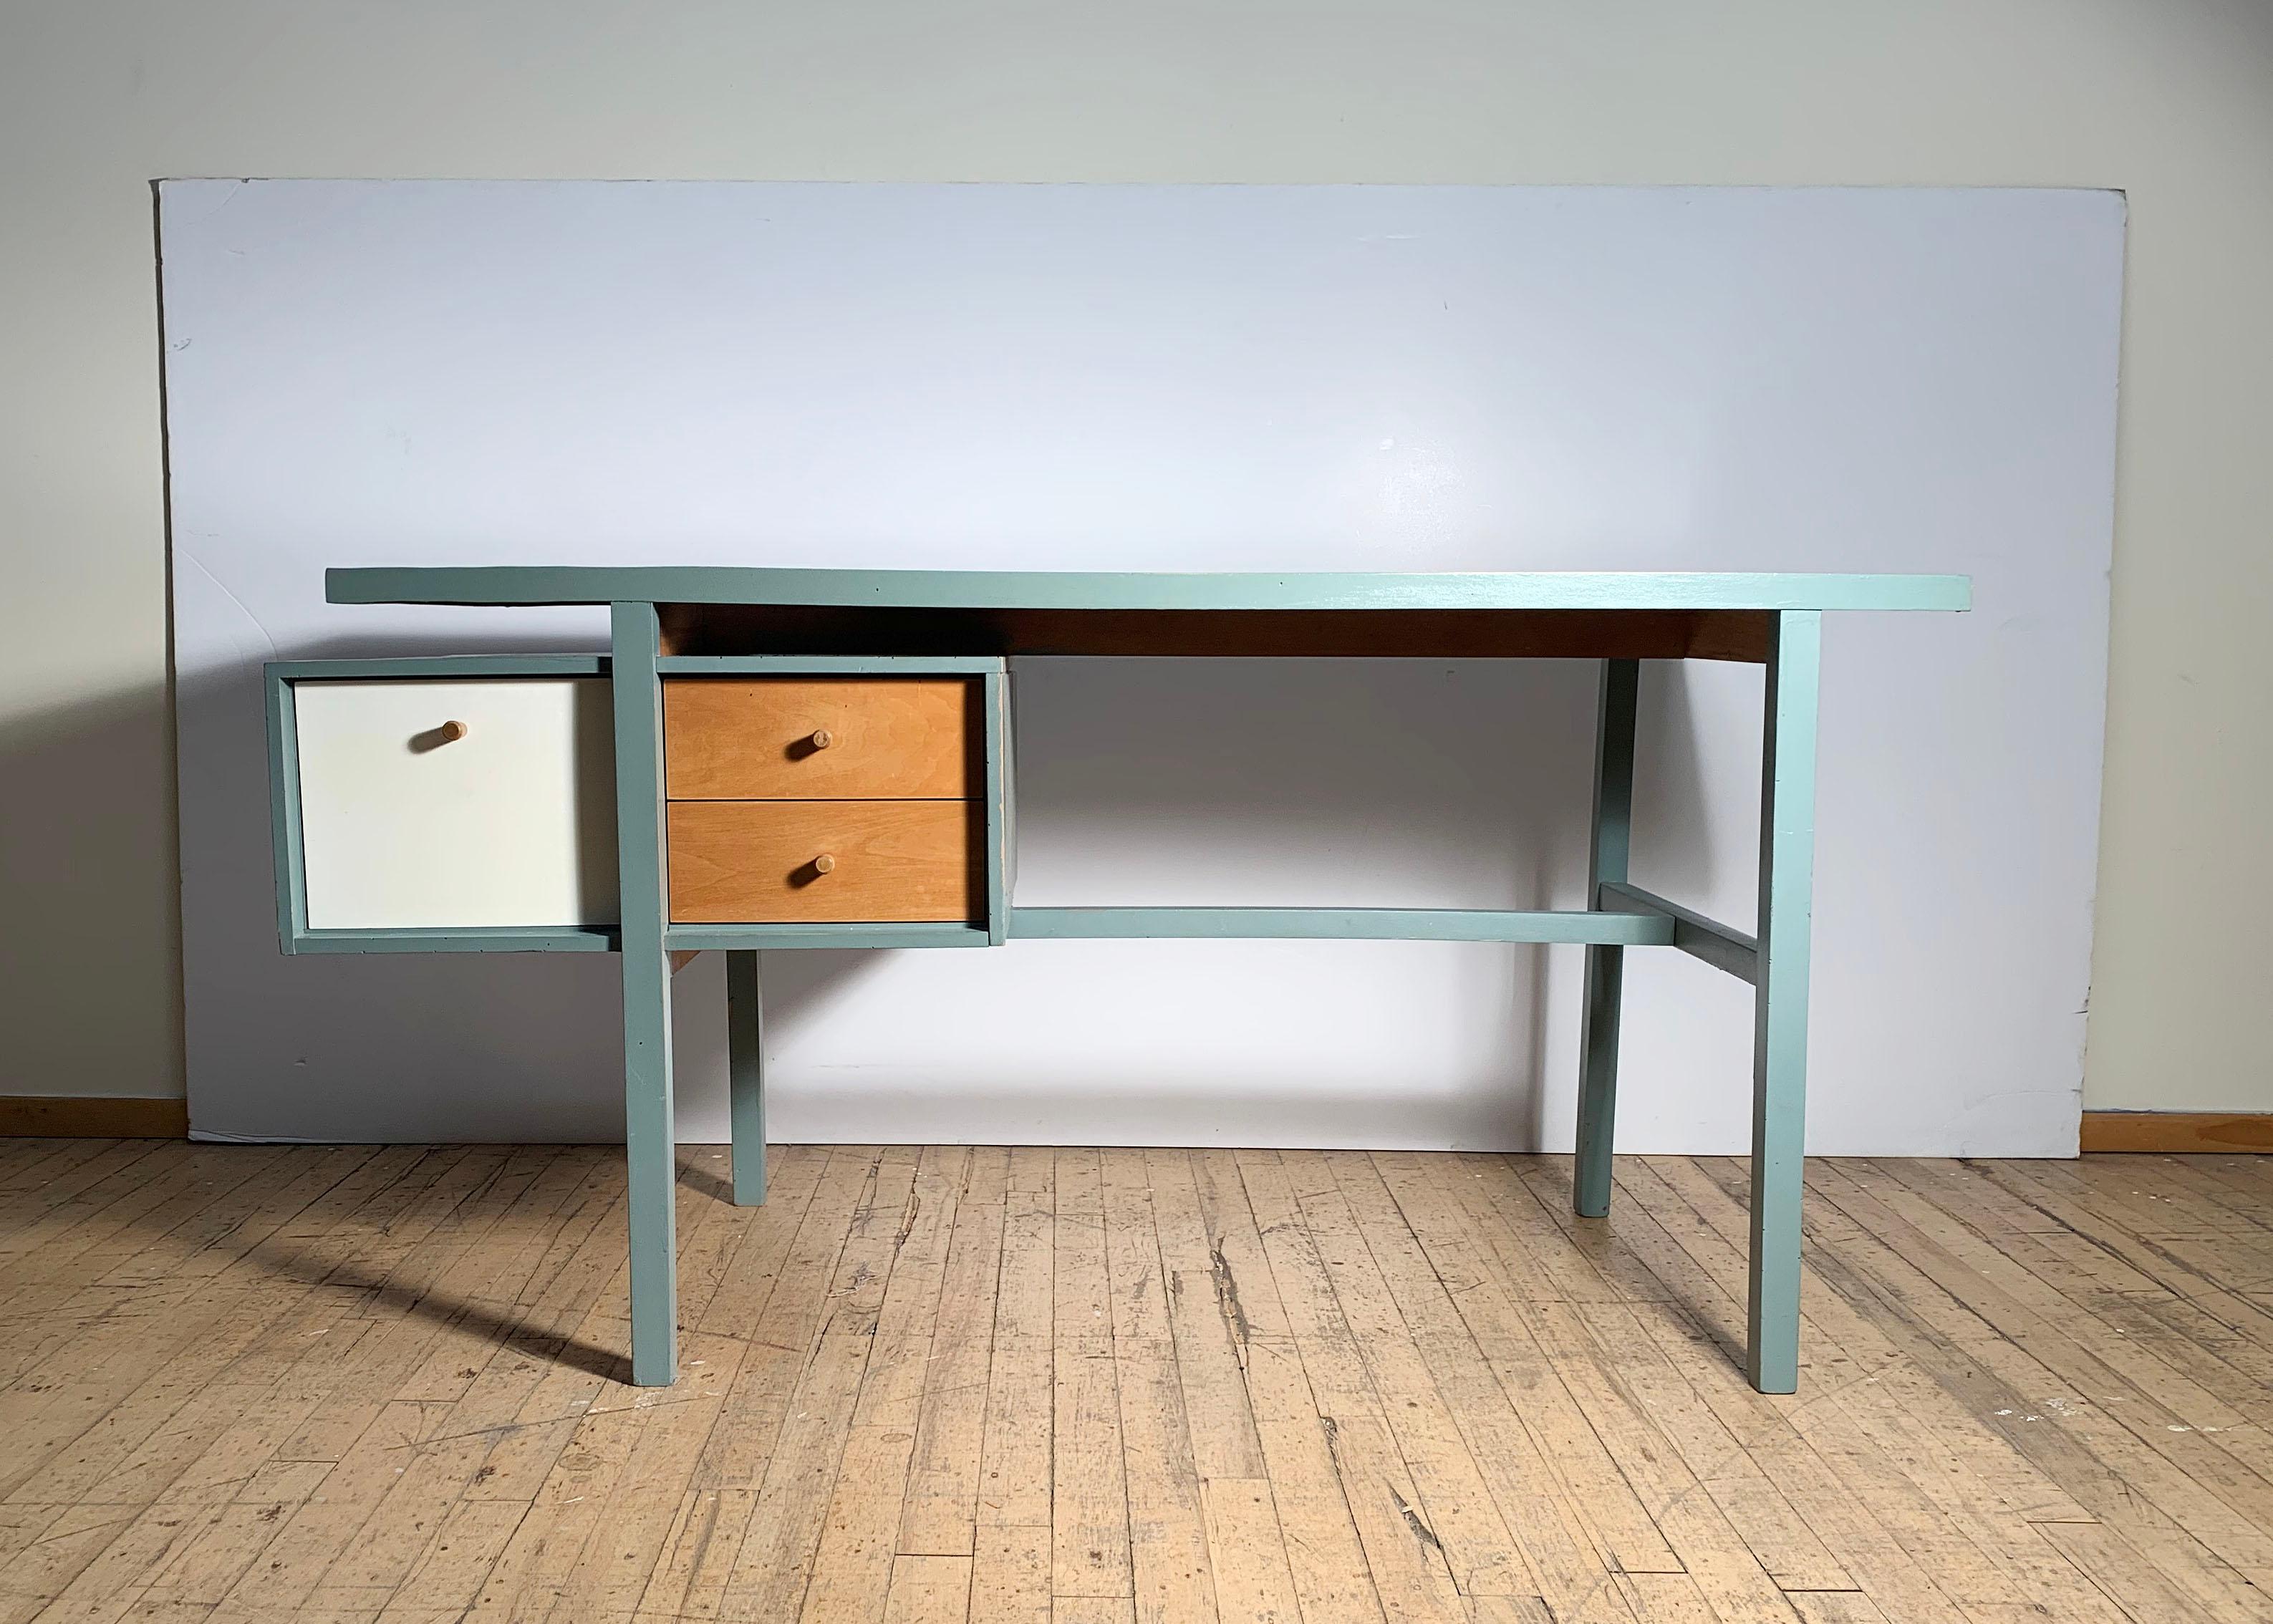 Early vintage Milo Baughman Architectural cantilevered desk for Glenn of California
c. 1950

This desk is being sold 